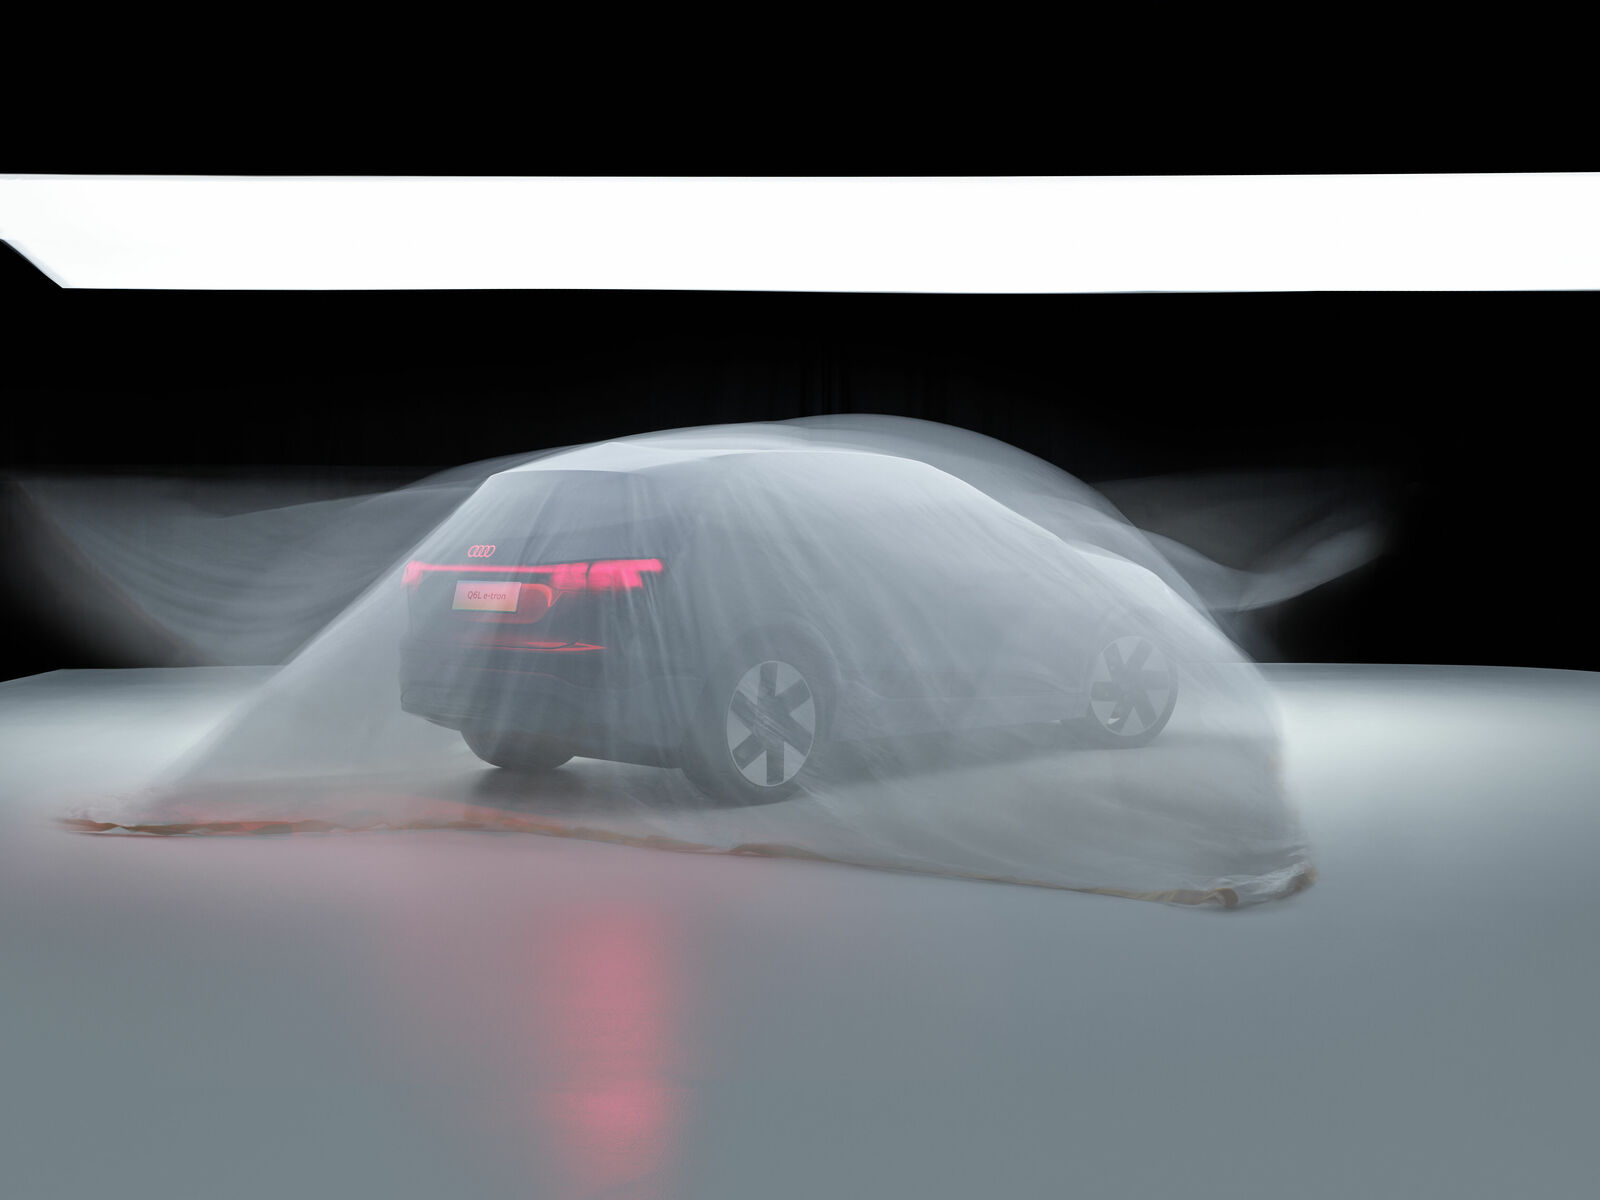 An Audi, covered by a transparent cloth that emphasizes the shape of the car and the red tail lights, stands in a dark room.